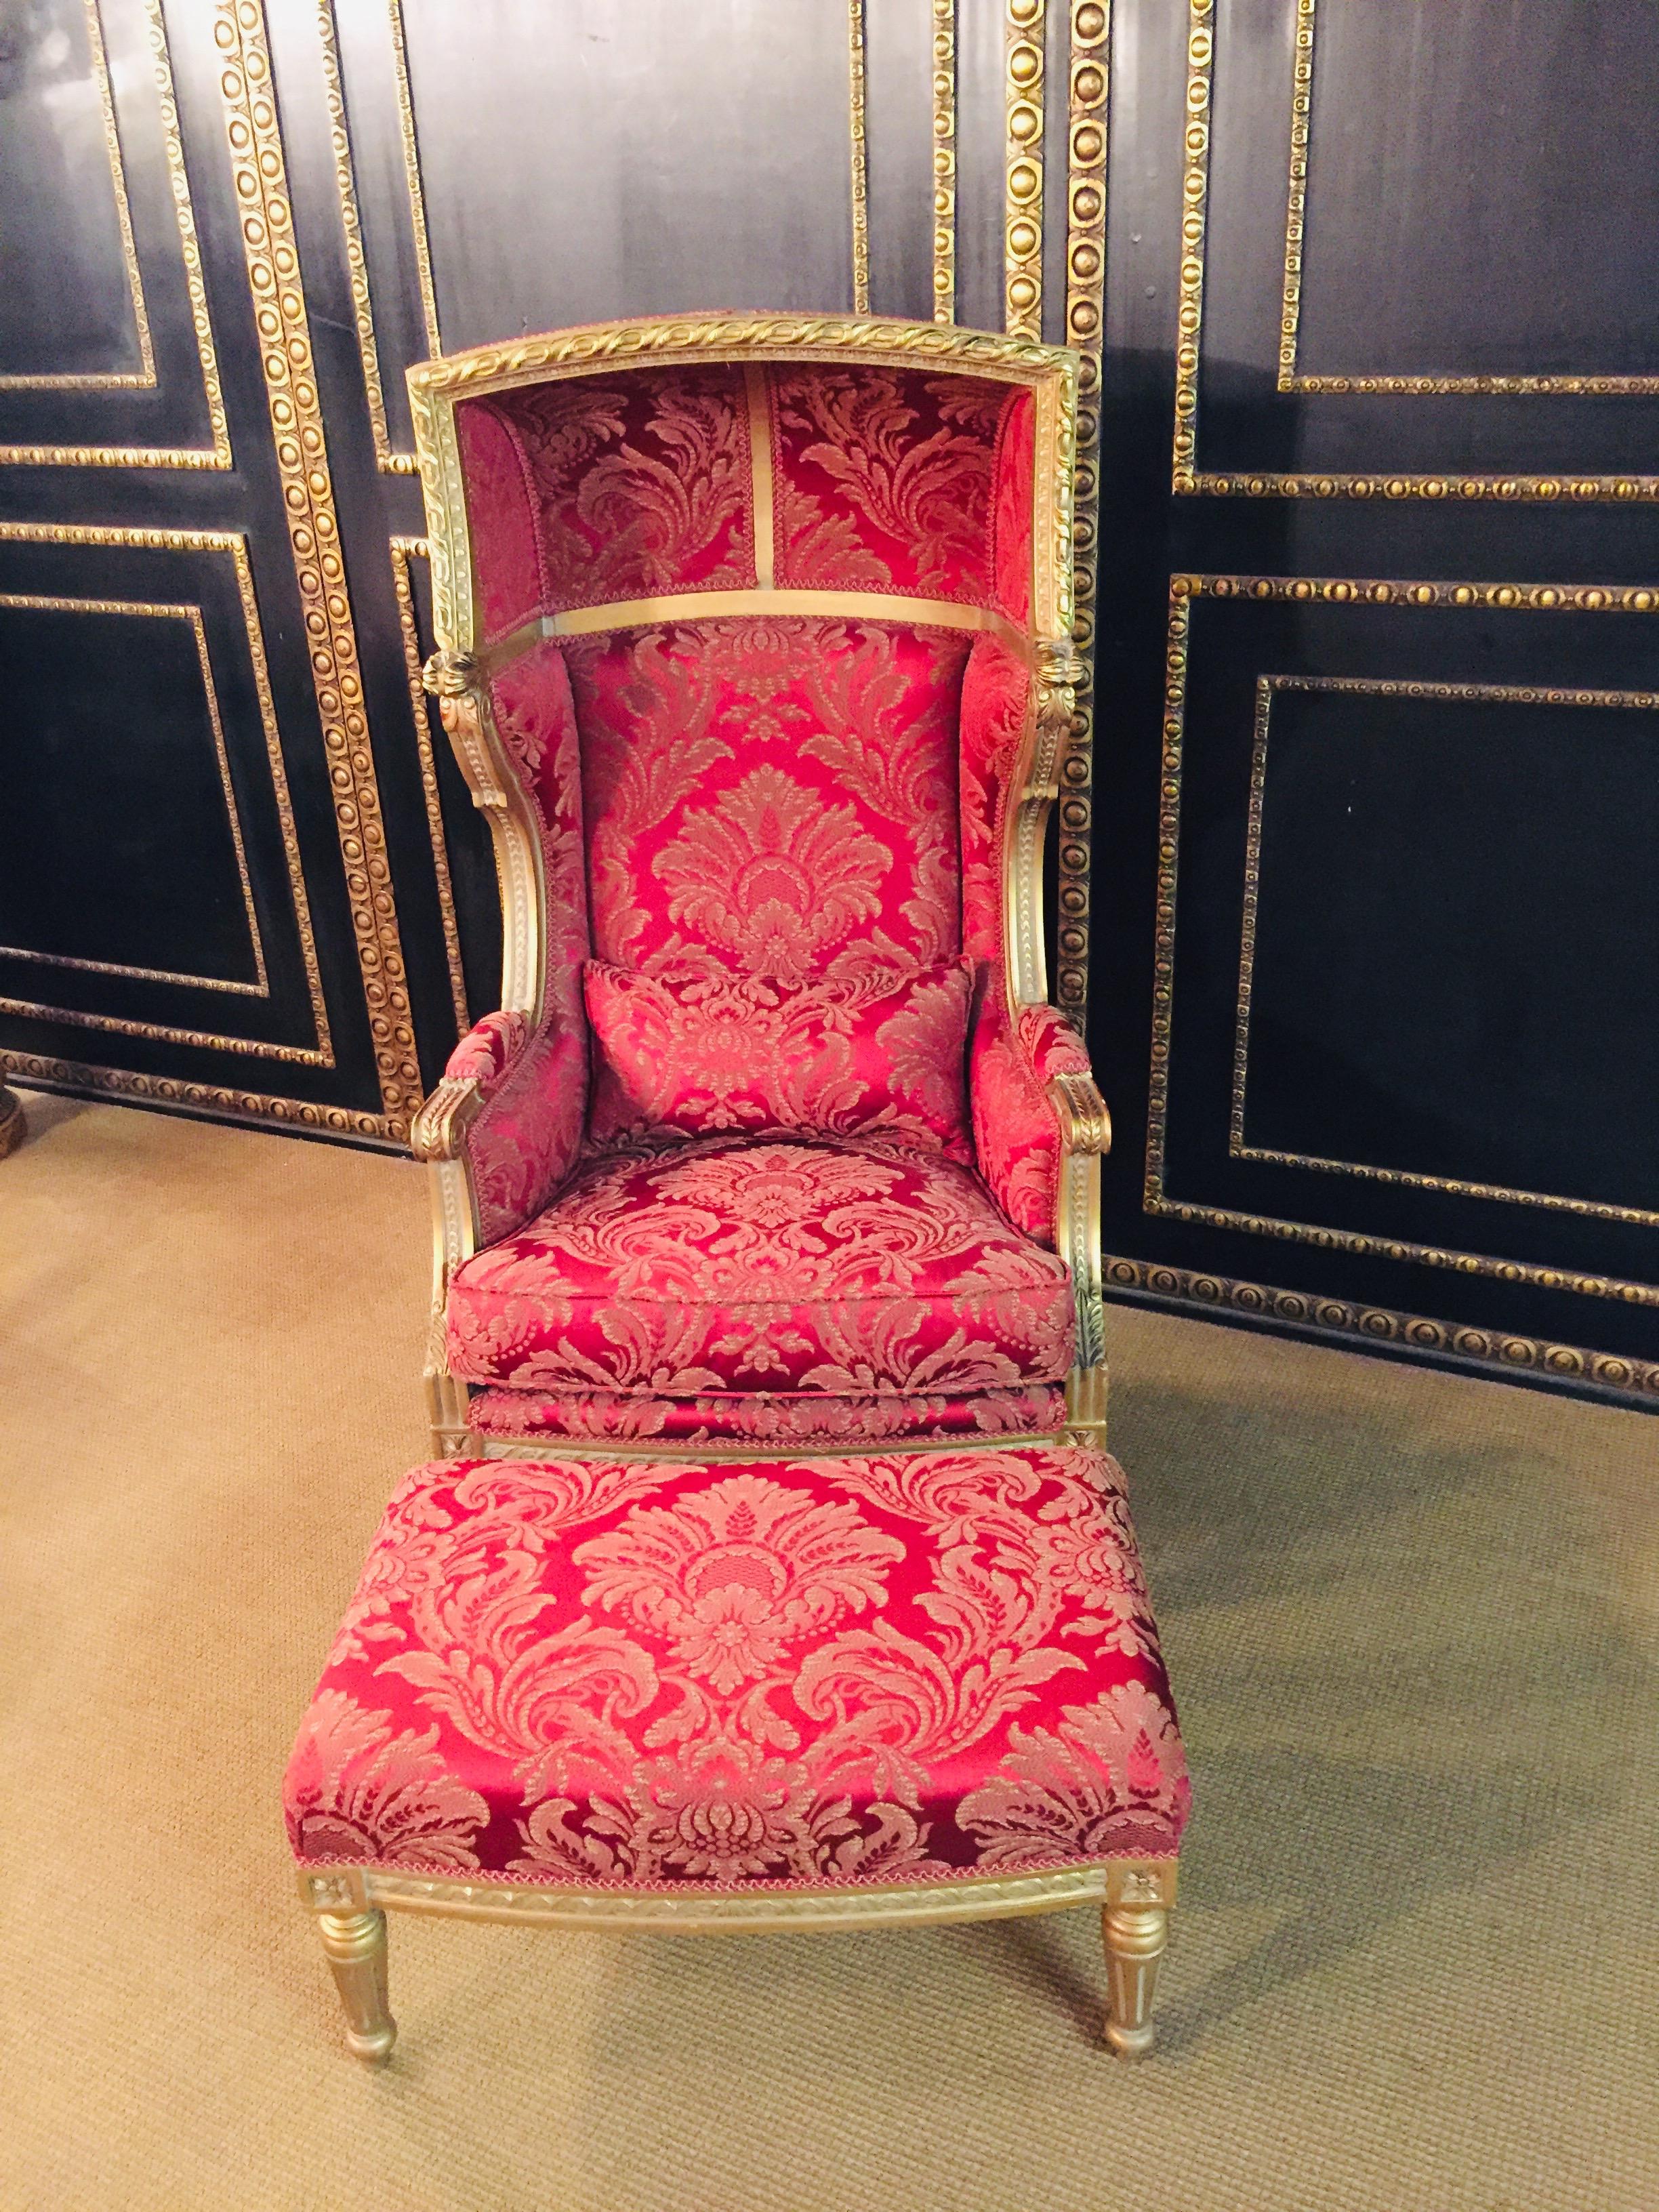 French Bergere / Armchair with Stool in the Antique Style of Louis XVI